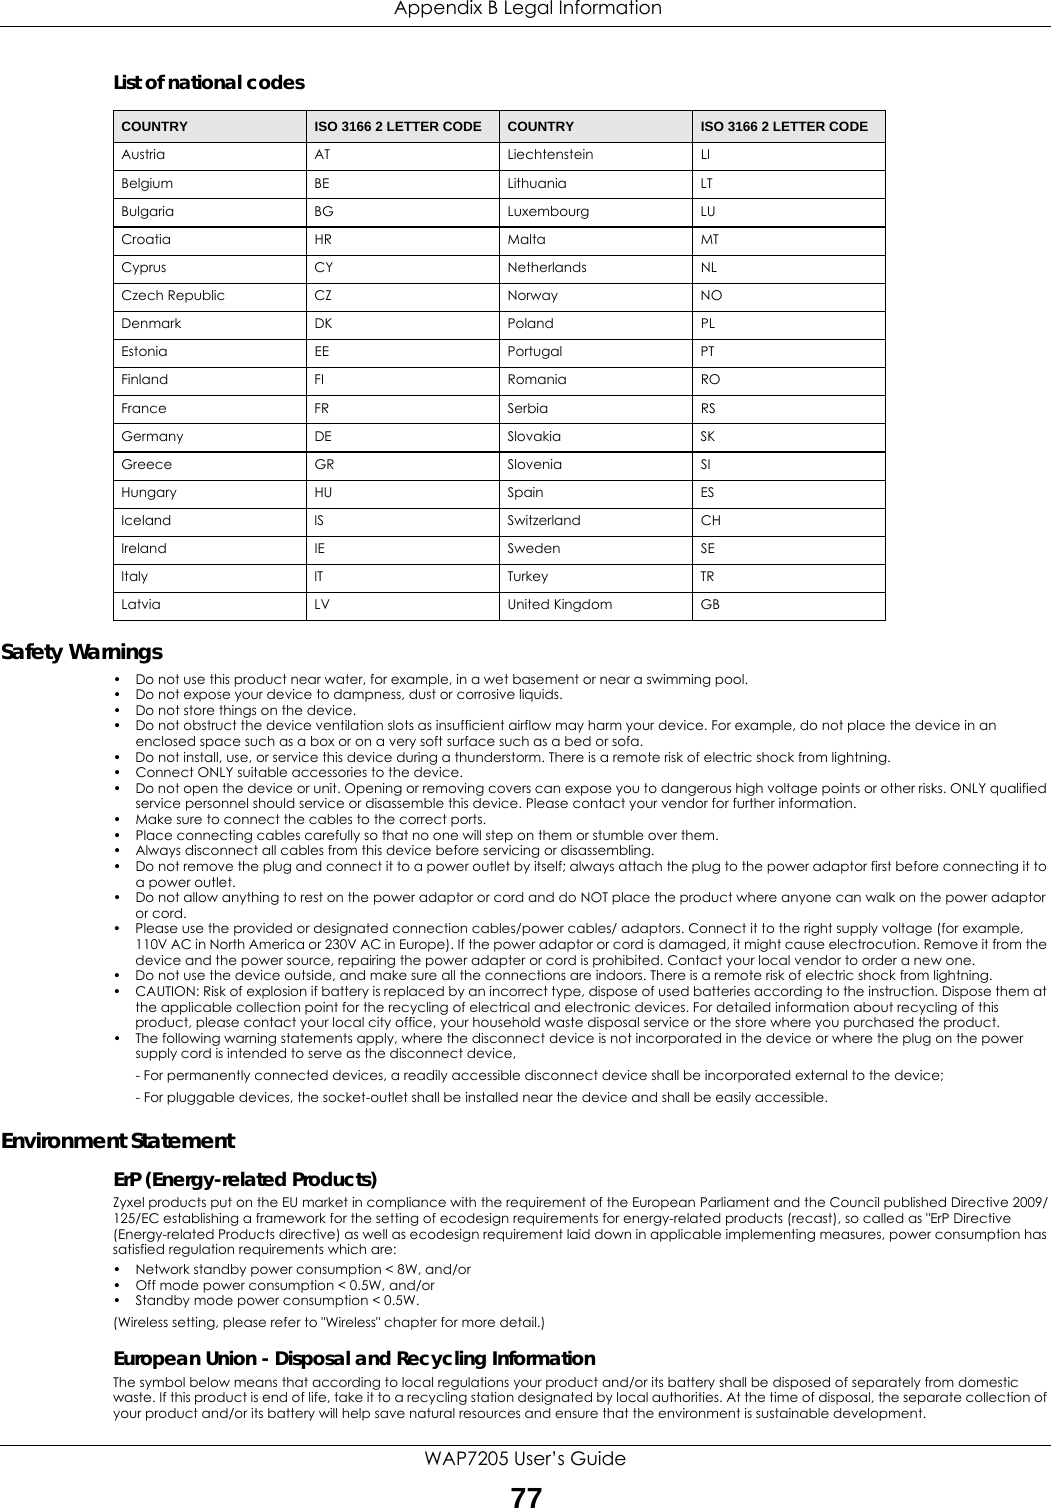  Appendix B Legal InformationWAP7205 User’s Guide77List of national codesSafety Warnings• Do not use this product near water, for example, in a wet basement or near a swimming pool.• Do not expose your device to dampness, dust or corrosive liquids.• Do not store things on the device.• Do not obstruct the device ventilation slots as insufficient airflow may harm your device. For example, do not place the device in an enclosed space such as a box or on a very soft surface such as a bed or sofa.• Do not install, use, or service this device during a thunderstorm. There is a remote risk of electric shock from lightning.• Connect ONLY suitable accessories to the device.• Do not open the device or unit. Opening or removing covers can expose you to dangerous high voltage points or other risks. ONLY qualified service personnel should service or disassemble this device. Please contact your vendor for further information.• Make sure to connect the cables to the correct ports.• Place connecting cables carefully so that no one will step on them or stumble over them.• Always disconnect all cables from this device before servicing or disassembling.• Do not remove the plug and connect it to a power outlet by itself; always attach the plug to the power adaptor first before connecting it to a power outlet.• Do not allow anything to rest on the power adaptor or cord and do NOT place the product where anyone can walk on the power adaptor or cord.• Please use the provided or designated connection cables/power cables/ adaptors. Connect it to the right supply voltage (for example, 110V AC in North America or 230V AC in Europe). If the power adaptor or cord is damaged, it might cause electrocution. Remove it from the device and the power source, repairing the power adapter or cord is prohibited. Contact your local vendor to order a new one.• Do not use the device outside, and make sure all the connections are indoors. There is a remote risk of electric shock from lightning.• CAUTION: Risk of explosion if battery is replaced by an incorrect type, dispose of used batteries according to the instruction. Dispose them at the applicable collection point for the recycling of electrical and electronic devices. For detailed information about recycling of this product, please contact your local city office, your household waste disposal service or the store where you purchased the product.• The following warning statements apply, where the disconnect device is not incorporated in the device or where the plug on the power supply cord is intended to serve as the disconnect device,- For permanently connected devices, a readily accessible disconnect device shall be incorporated external to the device;- For pluggable devices, the socket-outlet shall be installed near the device and shall be easily accessible.Environment StatementErP (Energy-related Products) Zyxel products put on the EU market in compliance with the requirement of the European Parliament and the Council published Directive 2009/125/EC establishing a framework for the setting of ecodesign requirements for energy-related products (recast), so called as &quot;ErP Directive (Energy-related Products directive) as well as ecodesign requirement laid down in applicable implementing measures, power consumption has satisfied regulation requirements which are:• Network standby power consumption &lt; 8W, and/or• Off mode power consumption &lt; 0.5W, and/or• Standby mode power consumption &lt; 0.5W.(Wireless setting, please refer to &quot;Wireless&quot; chapter for more detail.)European Union - Disposal and Recycling InformationThe symbol below means that according to local regulations your product and/or its battery shall be disposed of separately from domestic waste. If this product is end of life, take it to a recycling station designated by local authorities. At the time of disposal, the separate collection of your product and/or its battery will help save natural resources and ensure that the environment is sustainable development.COUNTRY ISO 3166 2 LETTER CODE COUNTRY ISO 3166 2 LETTER CODEAustria AT Liechtenstein LIBelgium BE Lithuania LTBulgaria BG Luxembourg LUCroatia HR Malta MTCyprus CY Netherlands NLCzech Republic CZ Norway NODenmark DK Poland PLEstonia EE Portugal PTFinland FI Romania ROFrance FR Serbia RSGermany DE Slovakia SKGreece GR Slovenia SIHungary HU Spain ESIceland IS Switzerland CHIreland IE Sweden SEItaly IT Turkey TRLatvia LV United Kingdom GB